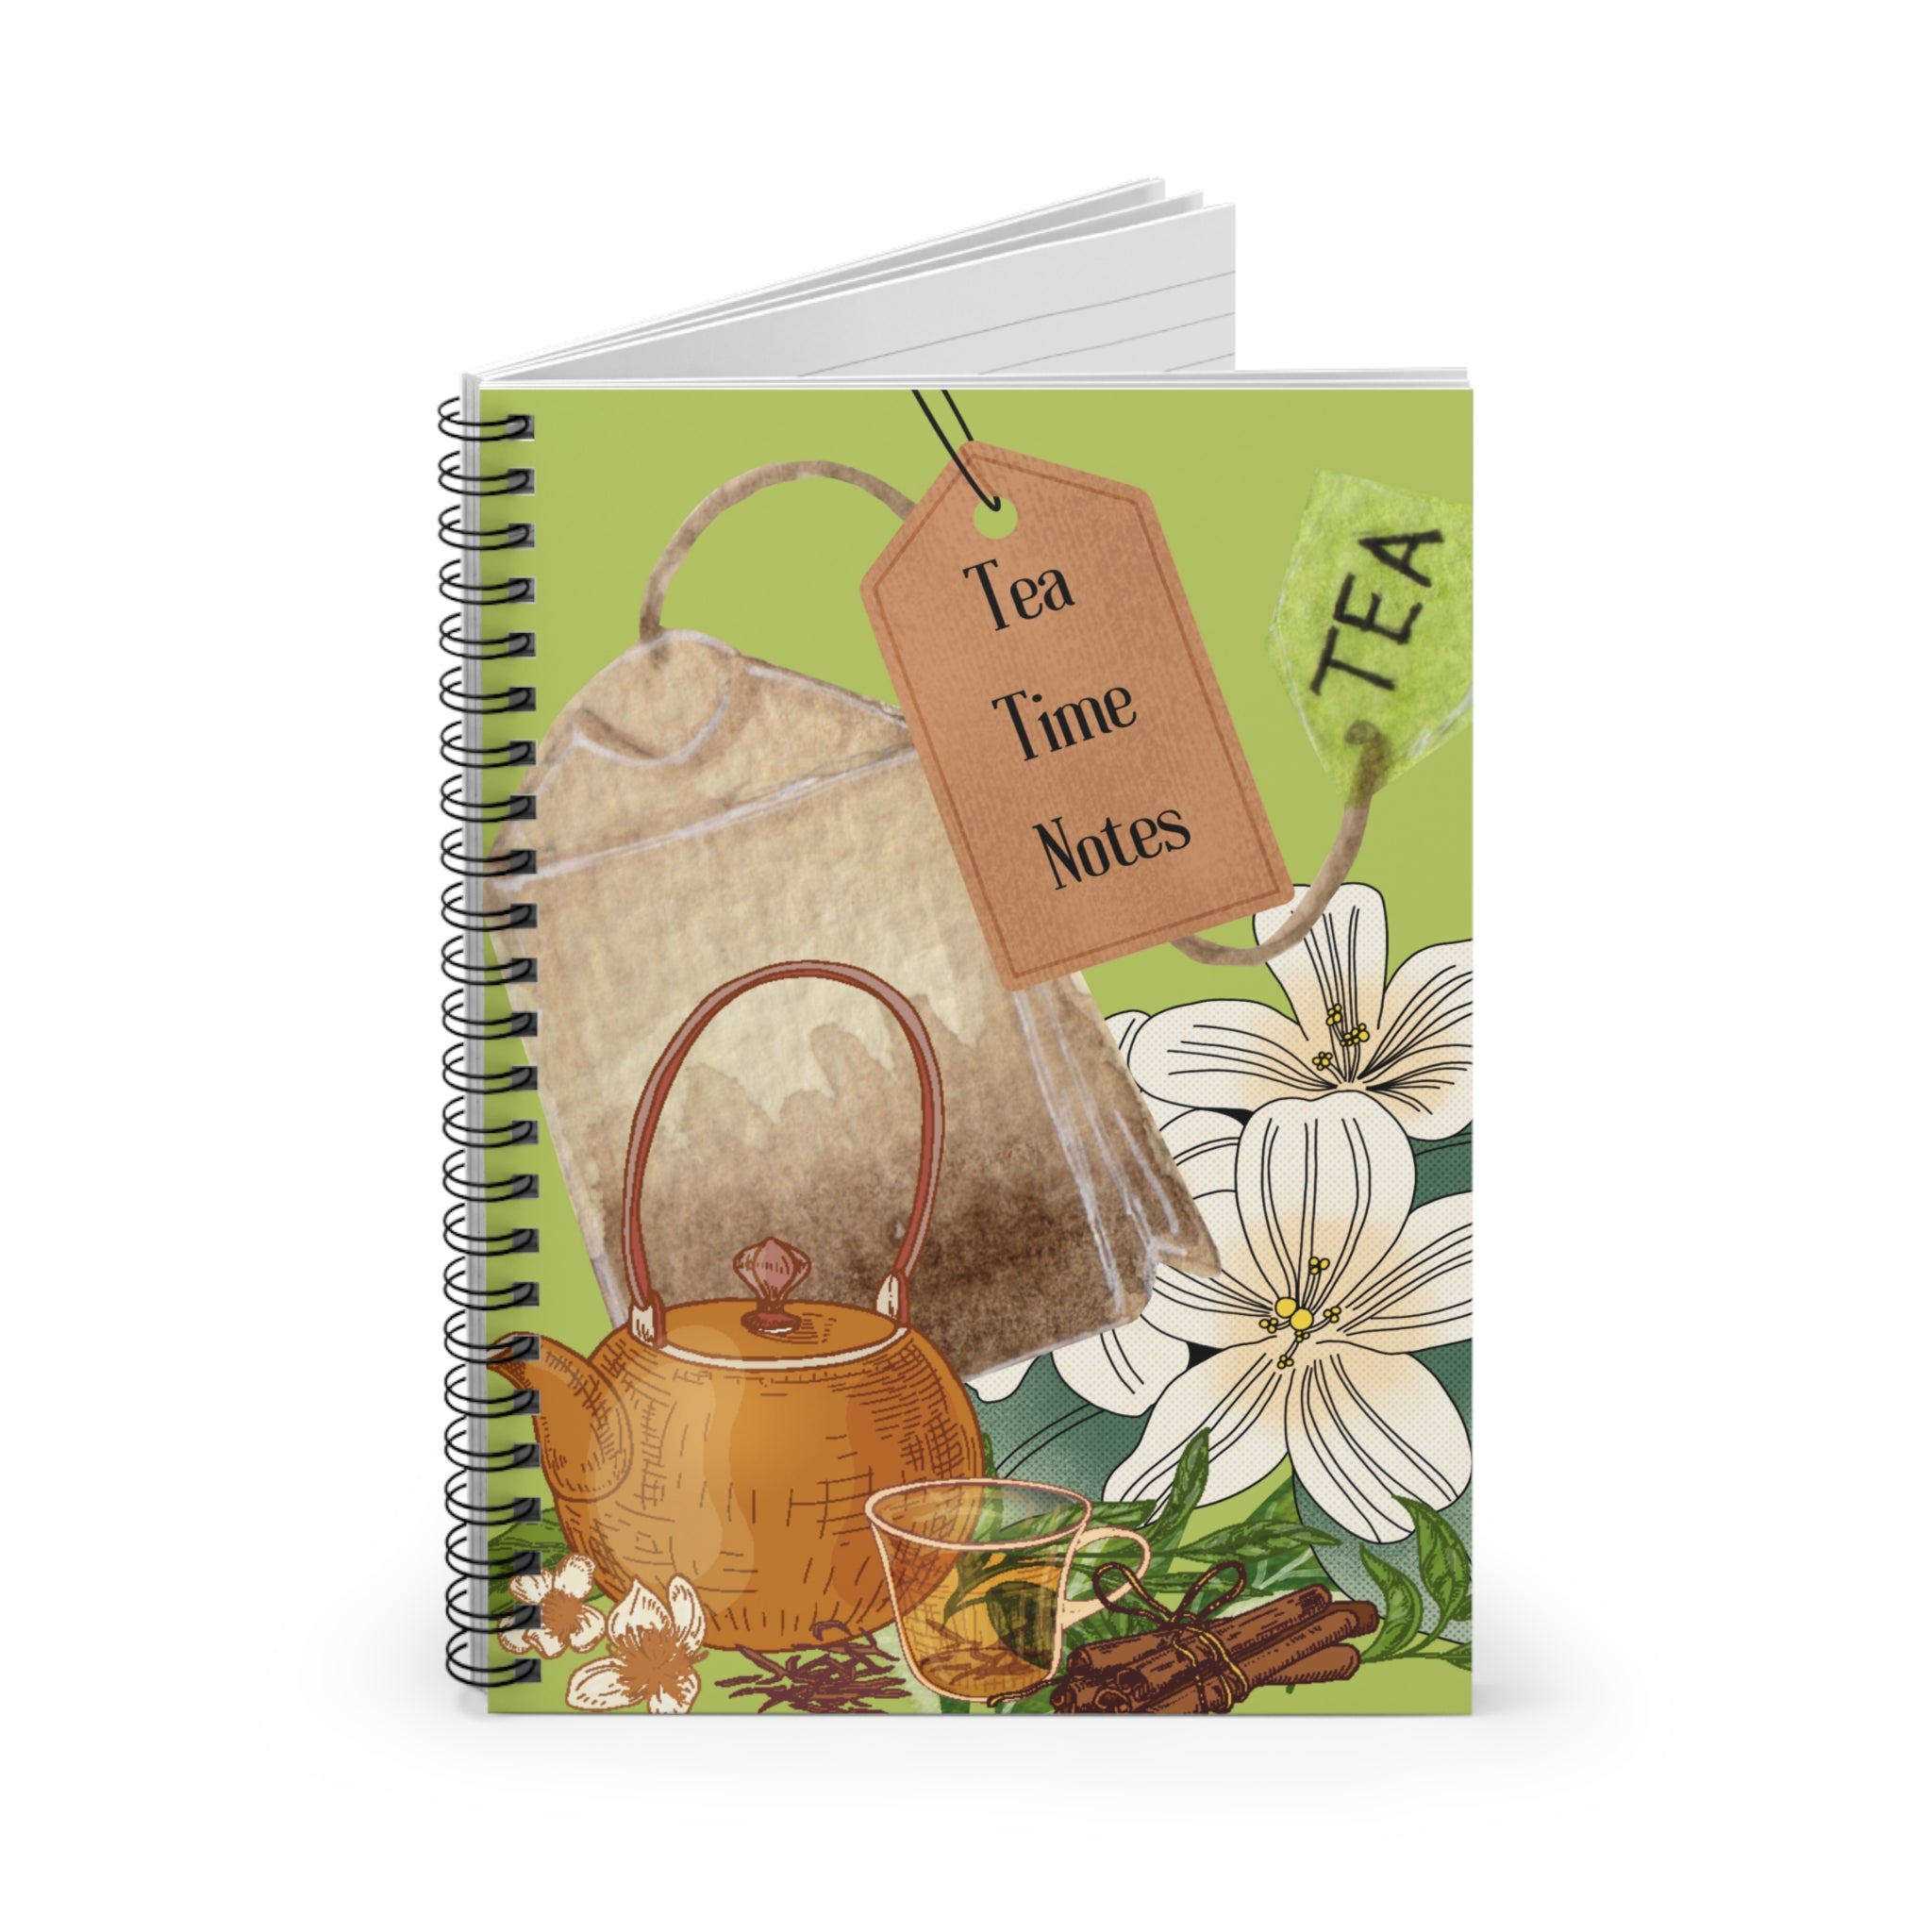 Tea Time Notes Spiral Notebook - Ruled Line Notebook Krazy Heart Designs Boutique One Size  